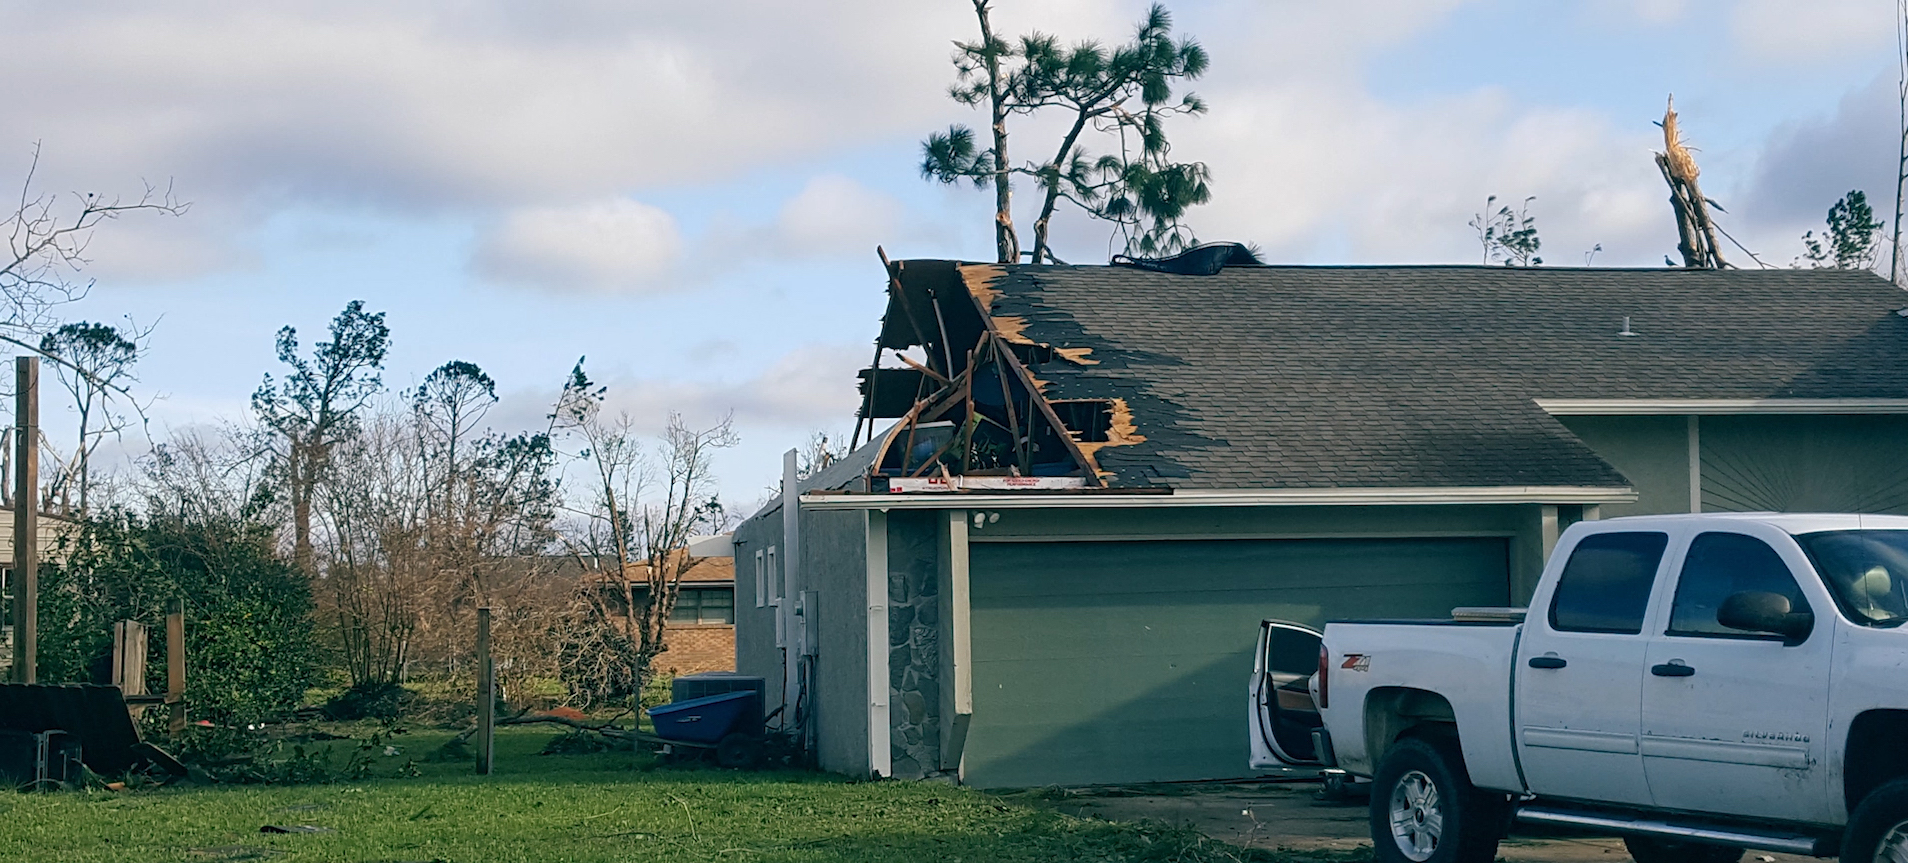 Wind Damage Insurance Claims in Orlando